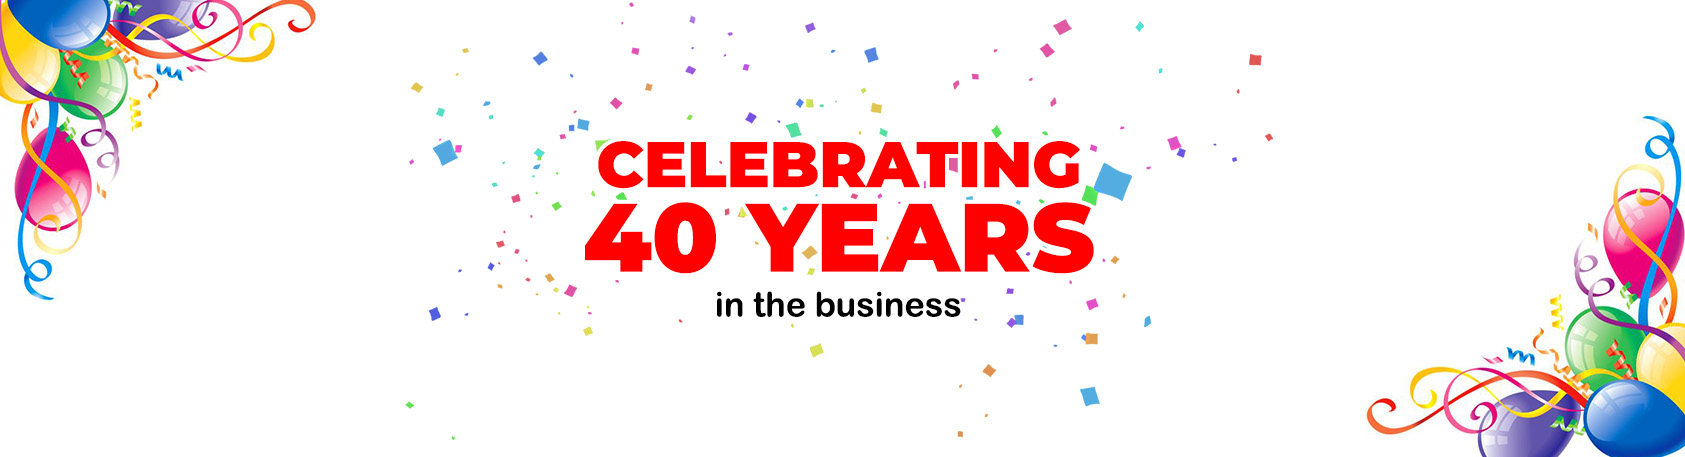 Celebrating 40 Years in Business Banner